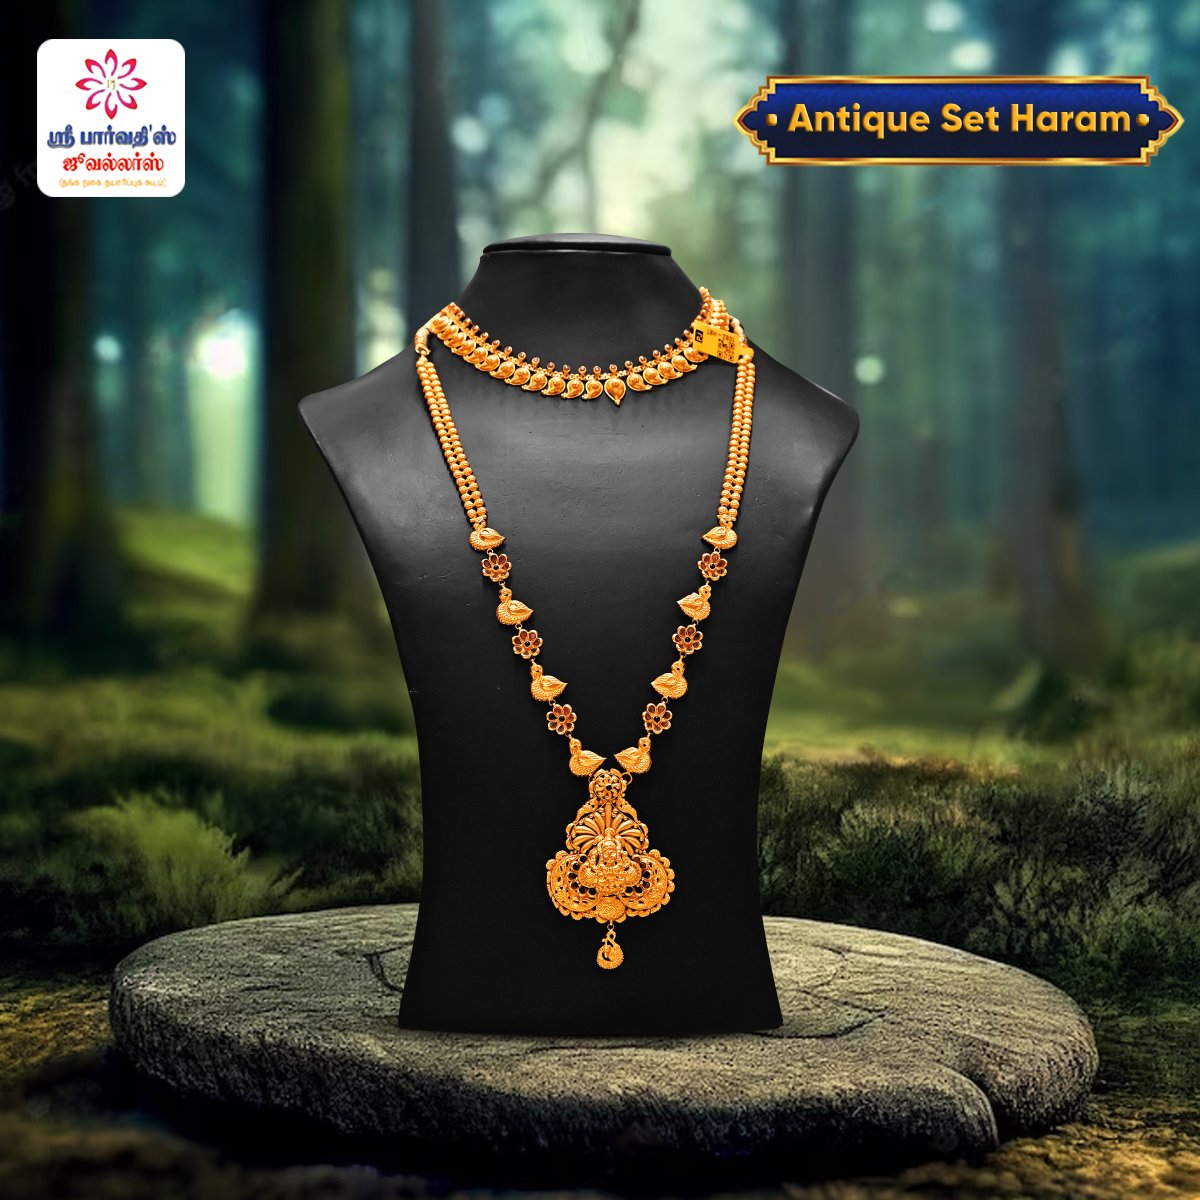 Experience the majesty of Sri Parvathi's Jewellers' trendy traditional fancy set haram. ✨❤️
,
Shop now and elevate your style game! ❤️
,
#SriParvathisJewellery #jewelrylove #SriParvathisJewellers #feelinglikequeen